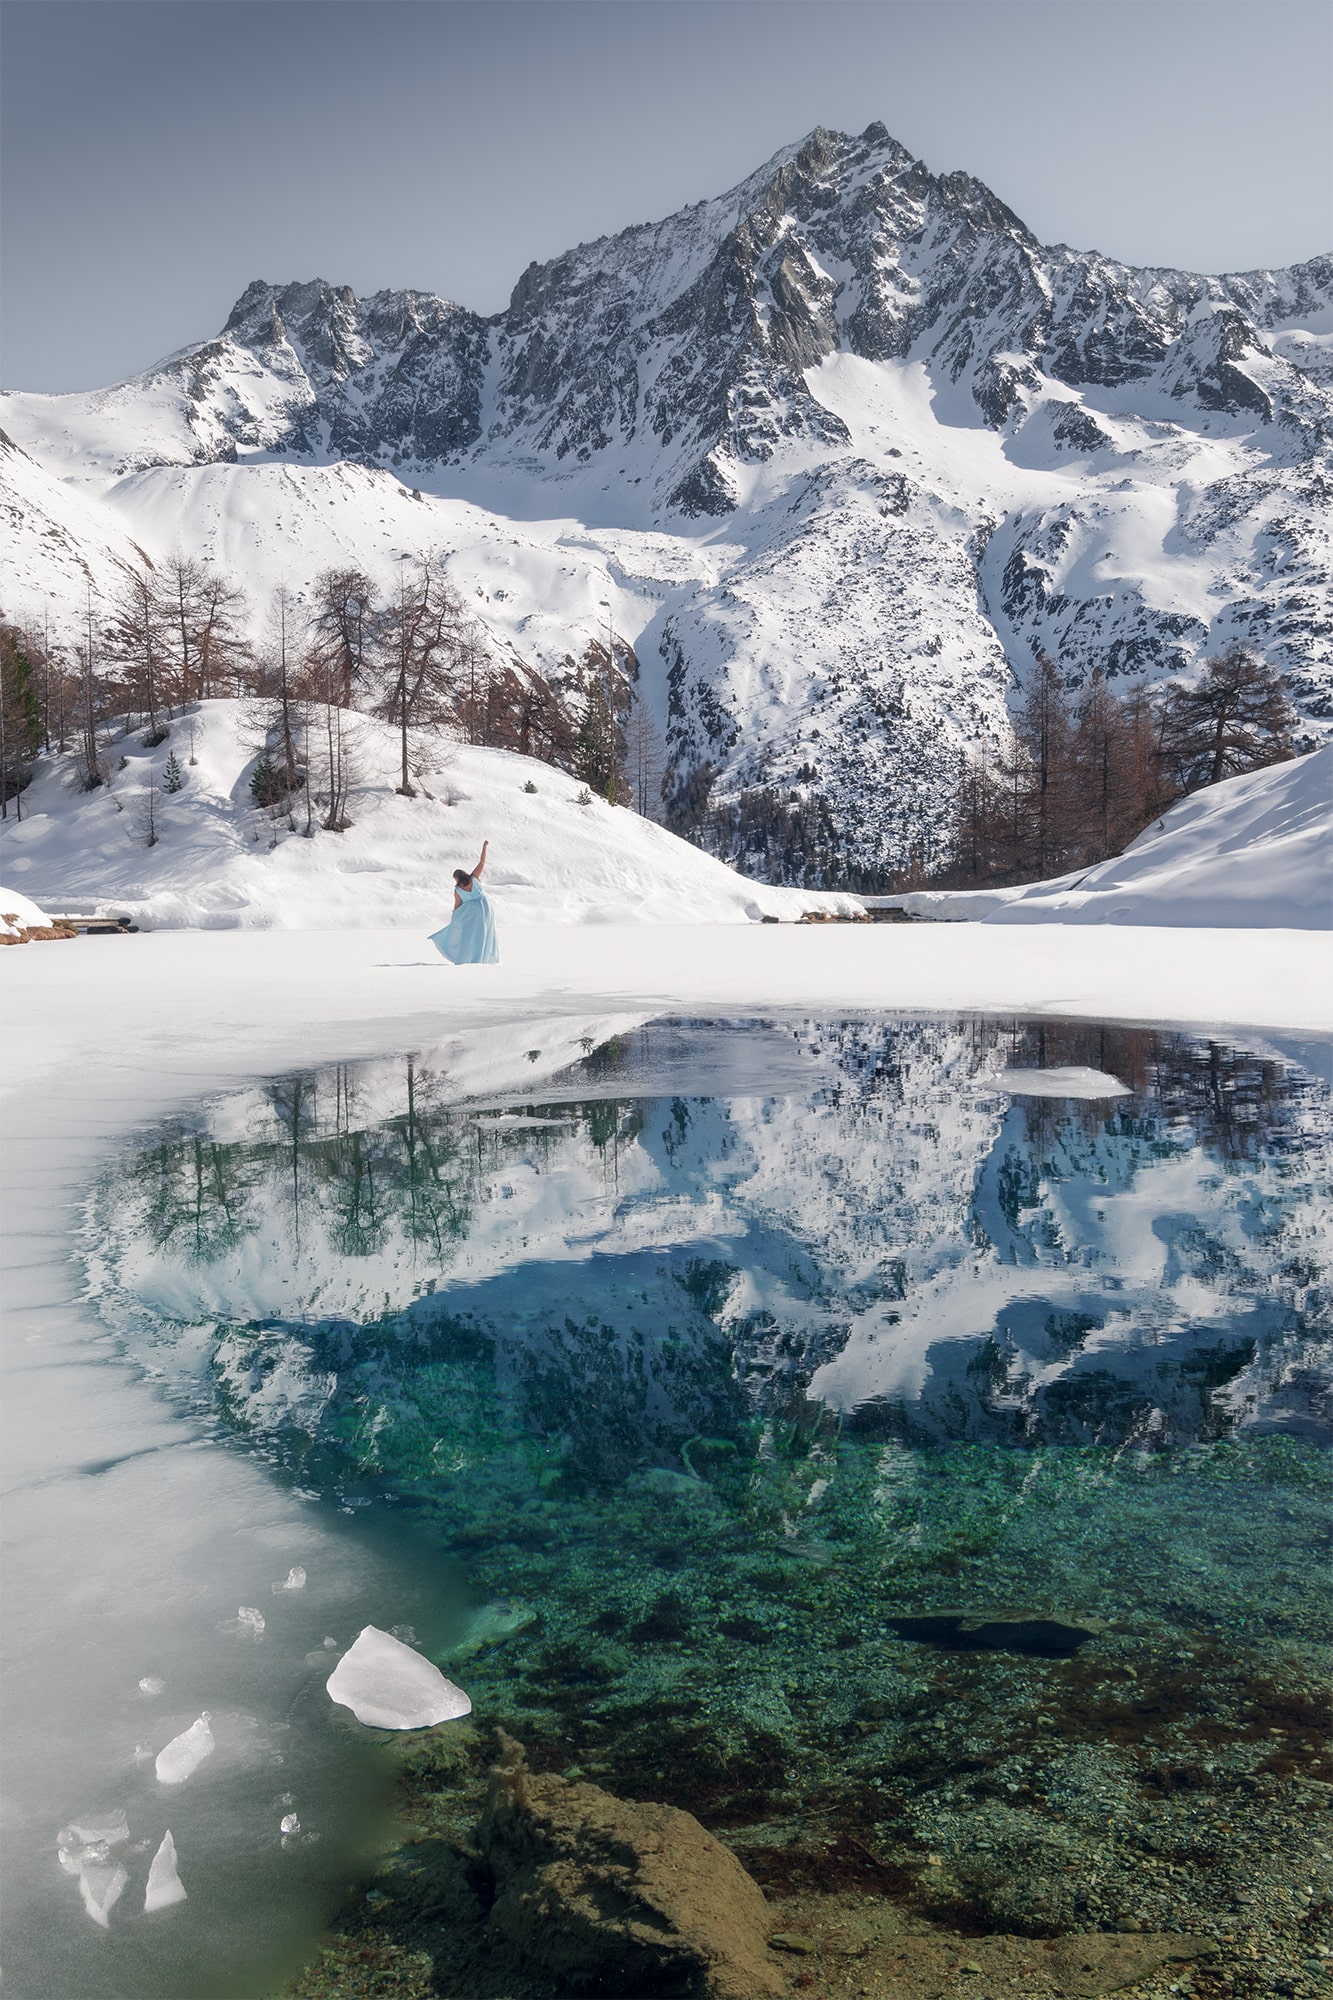 Immerse yourself in the enchanting world of Swiss landscape photography with this captivating self-portrait by Jennifer Esseiva. The renowned Swiss photographer gracefully dances atop the frozen Lac Bleu in Arolla, amidst the majestic Swiss Alps. Jennifer, adorned in a fairytale turquoise dress, adds a touch of magic to the pristine snow-covered landscape. Taken with her trusted Nikon Z8 camera, this stunning photograph captures the ethereal beauty of the Swiss Alps, inviting viewers to experience the wonder of nature through Jennifer's lens.